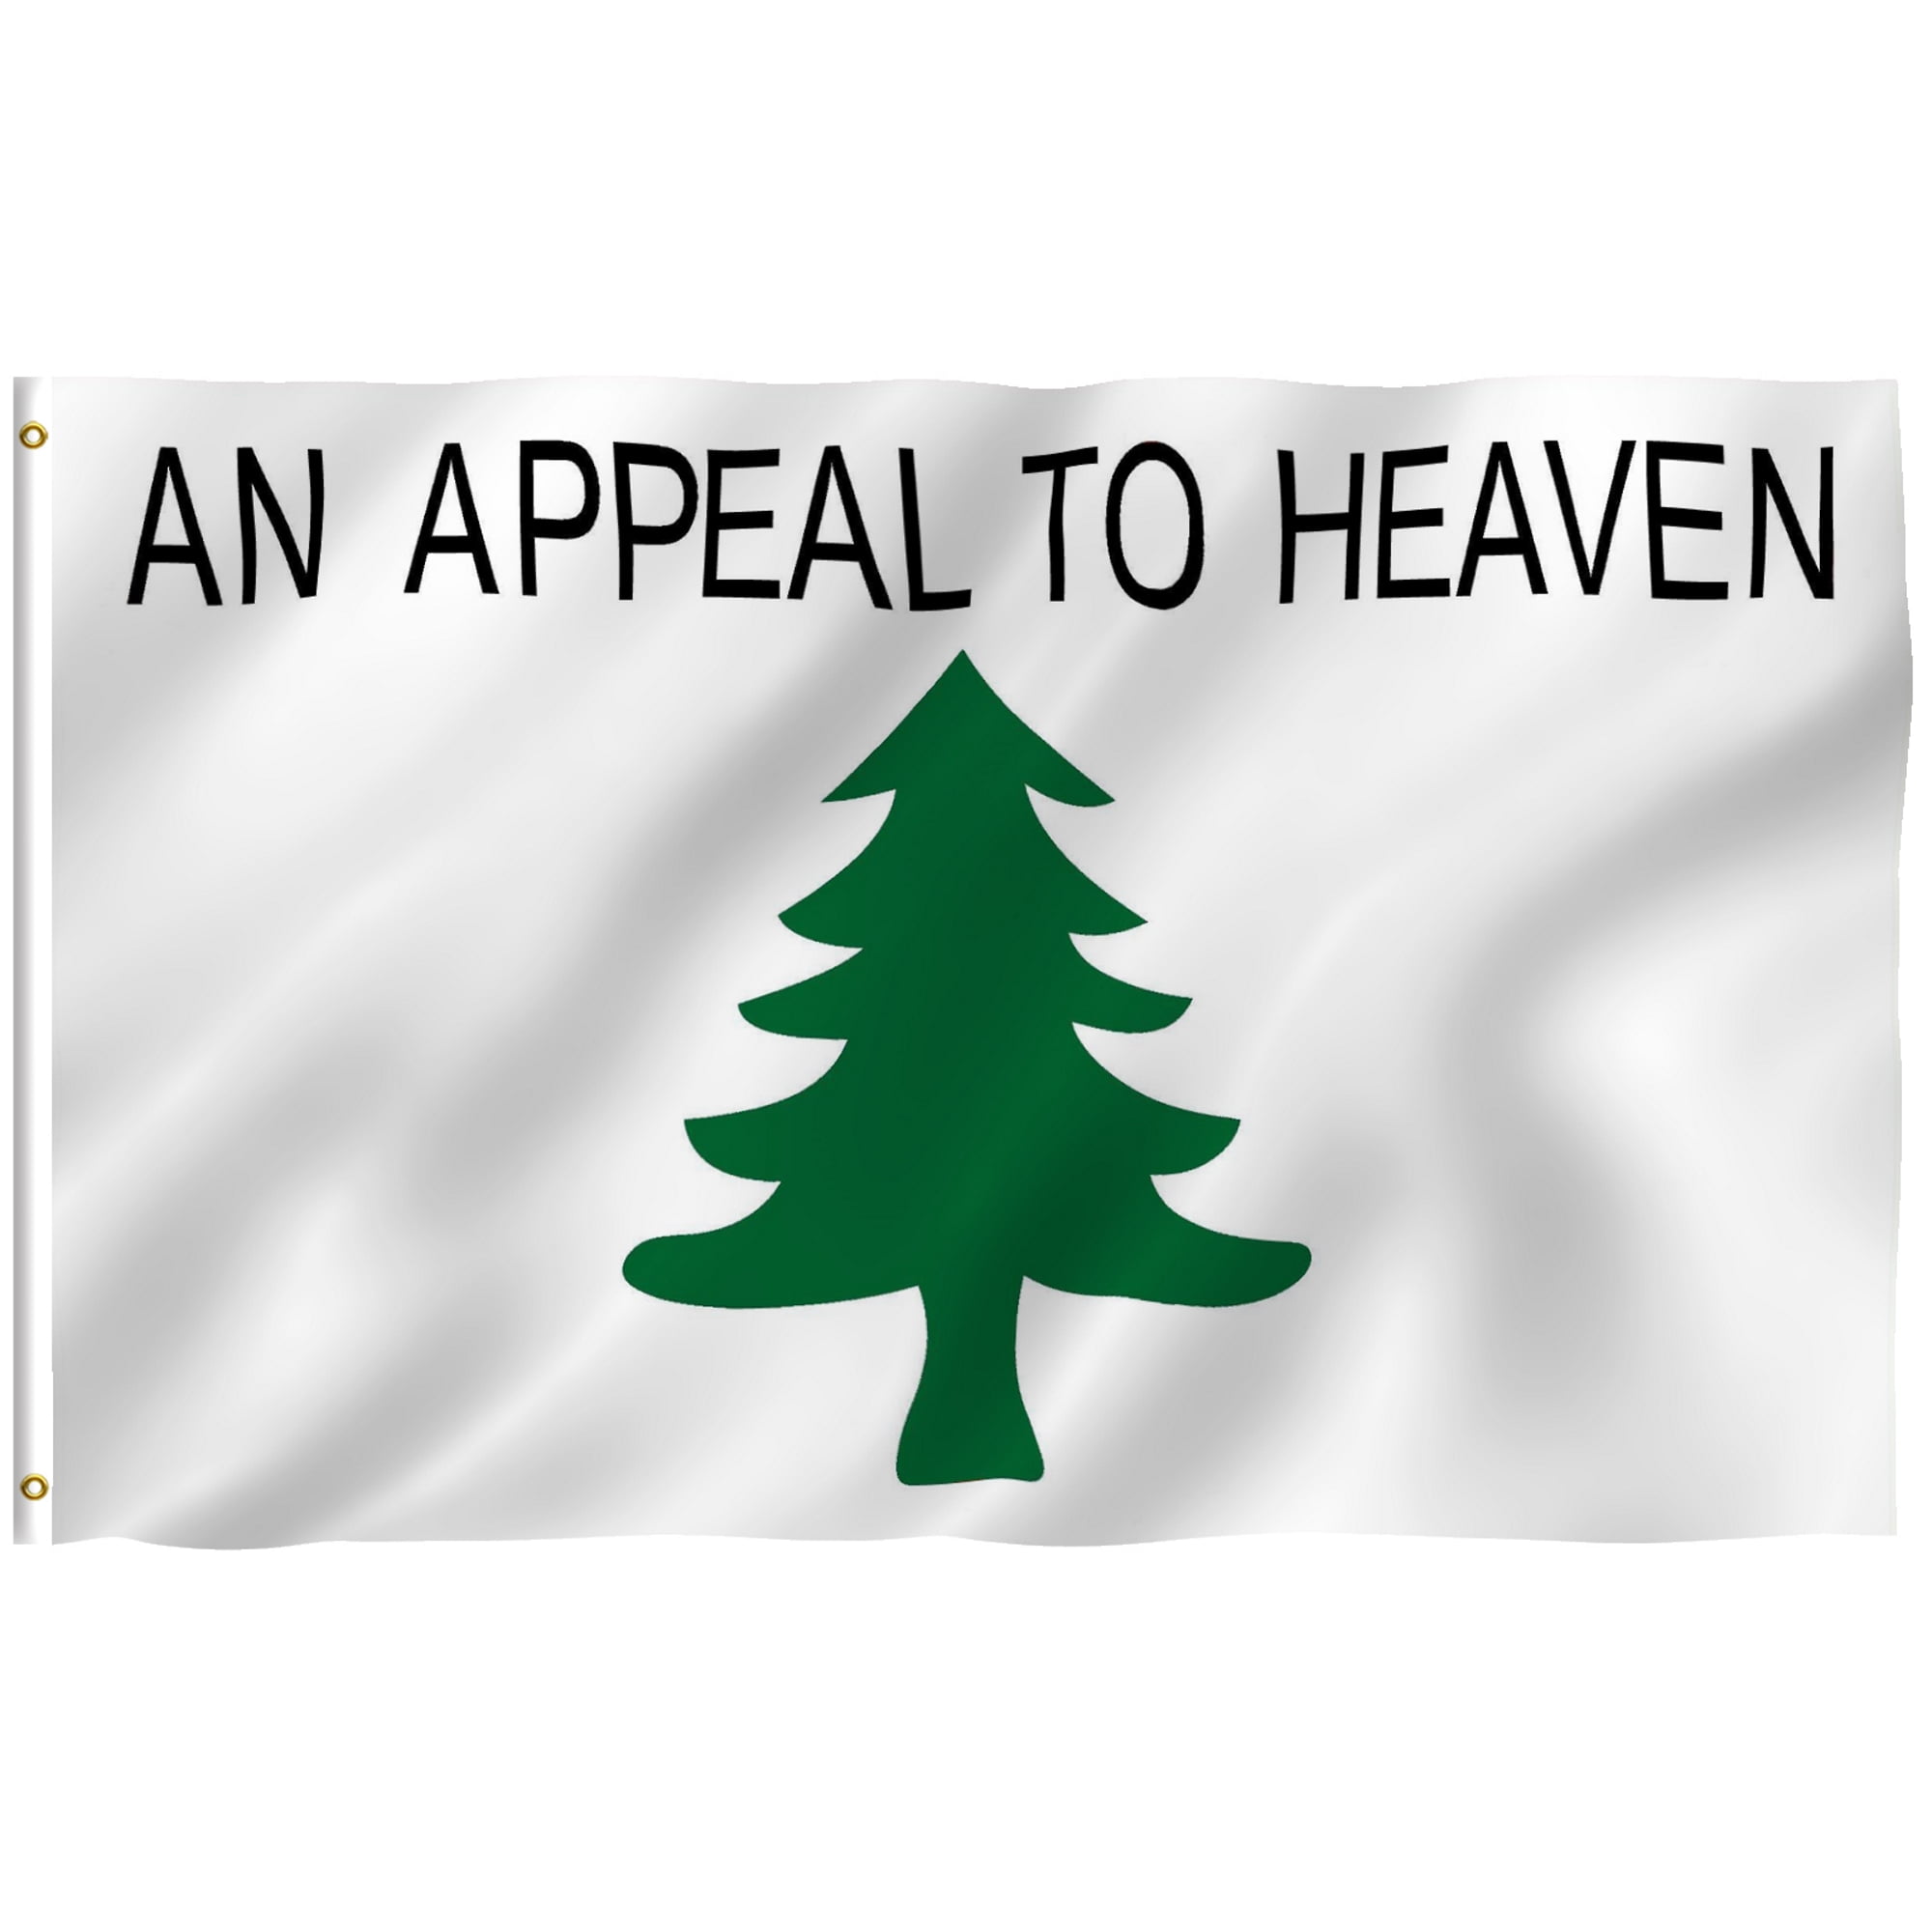 AN APPEAL TO HEAVEN Flag 3x5 ft Realistic Pine Tree American Revolution Liberty